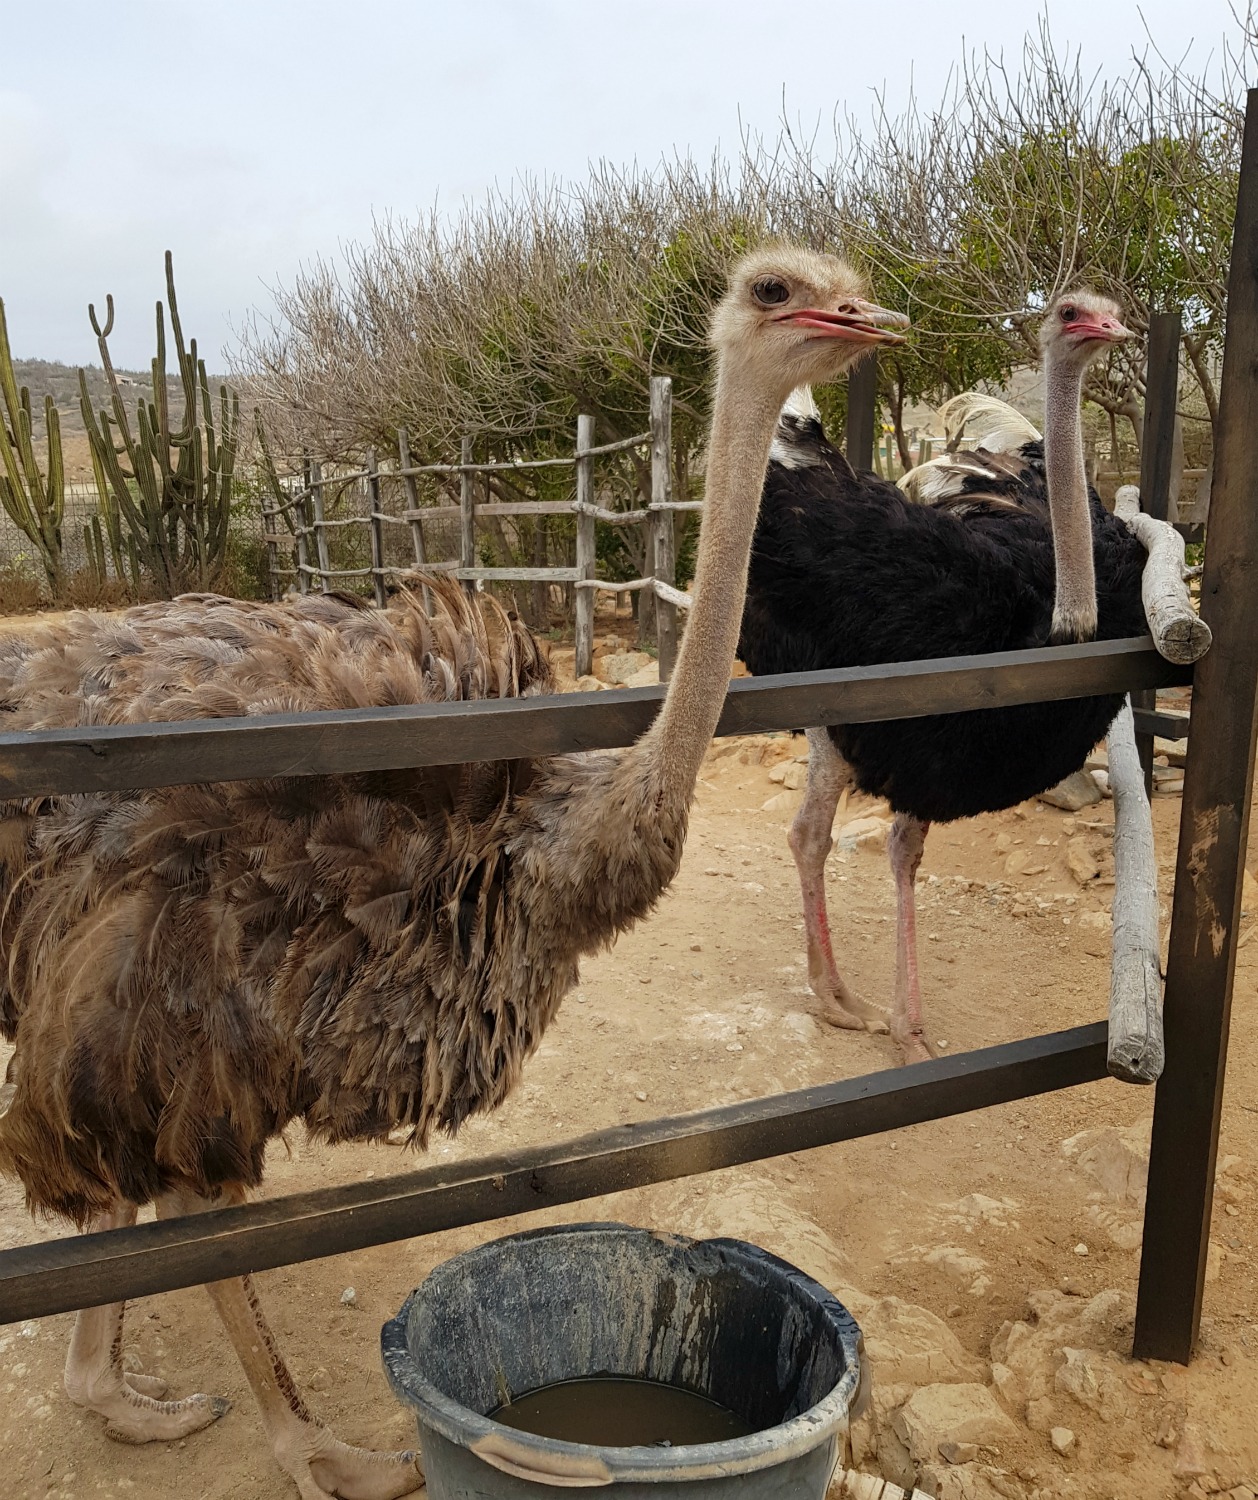 Two ostriches at the Aruba ostrich farm - we visited and fed them as part of a tour of the island 